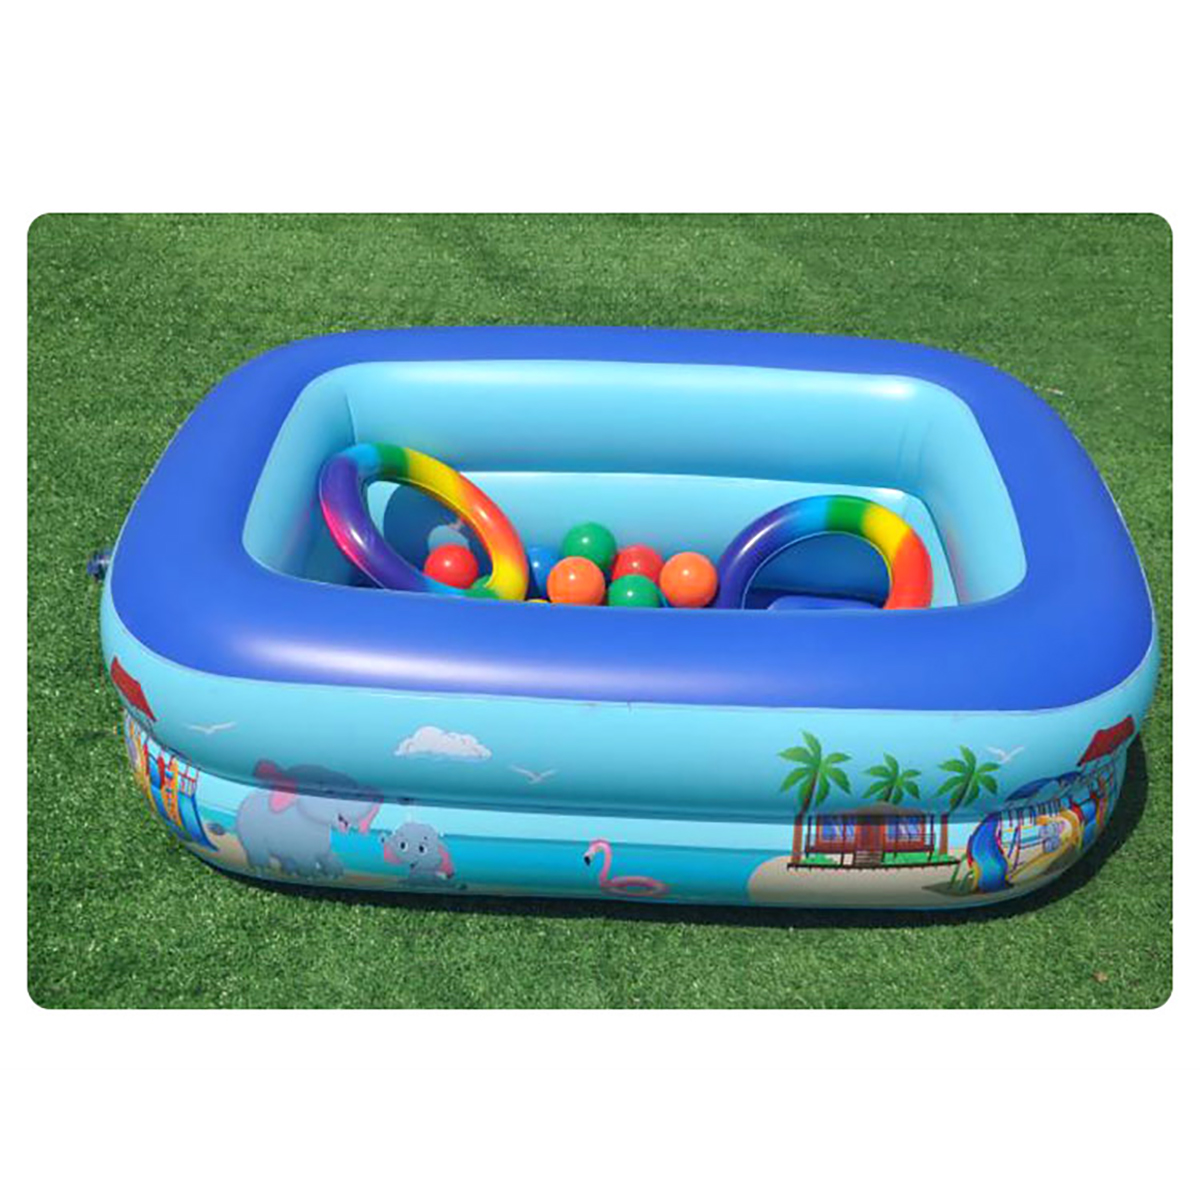 Thickened-PVC-Inflatable-Swimming-Pool-Childrens-Swimming-Pool-Bath-Tub-Outdoor-Indoor-Play-Pool-Chi-1856509-17